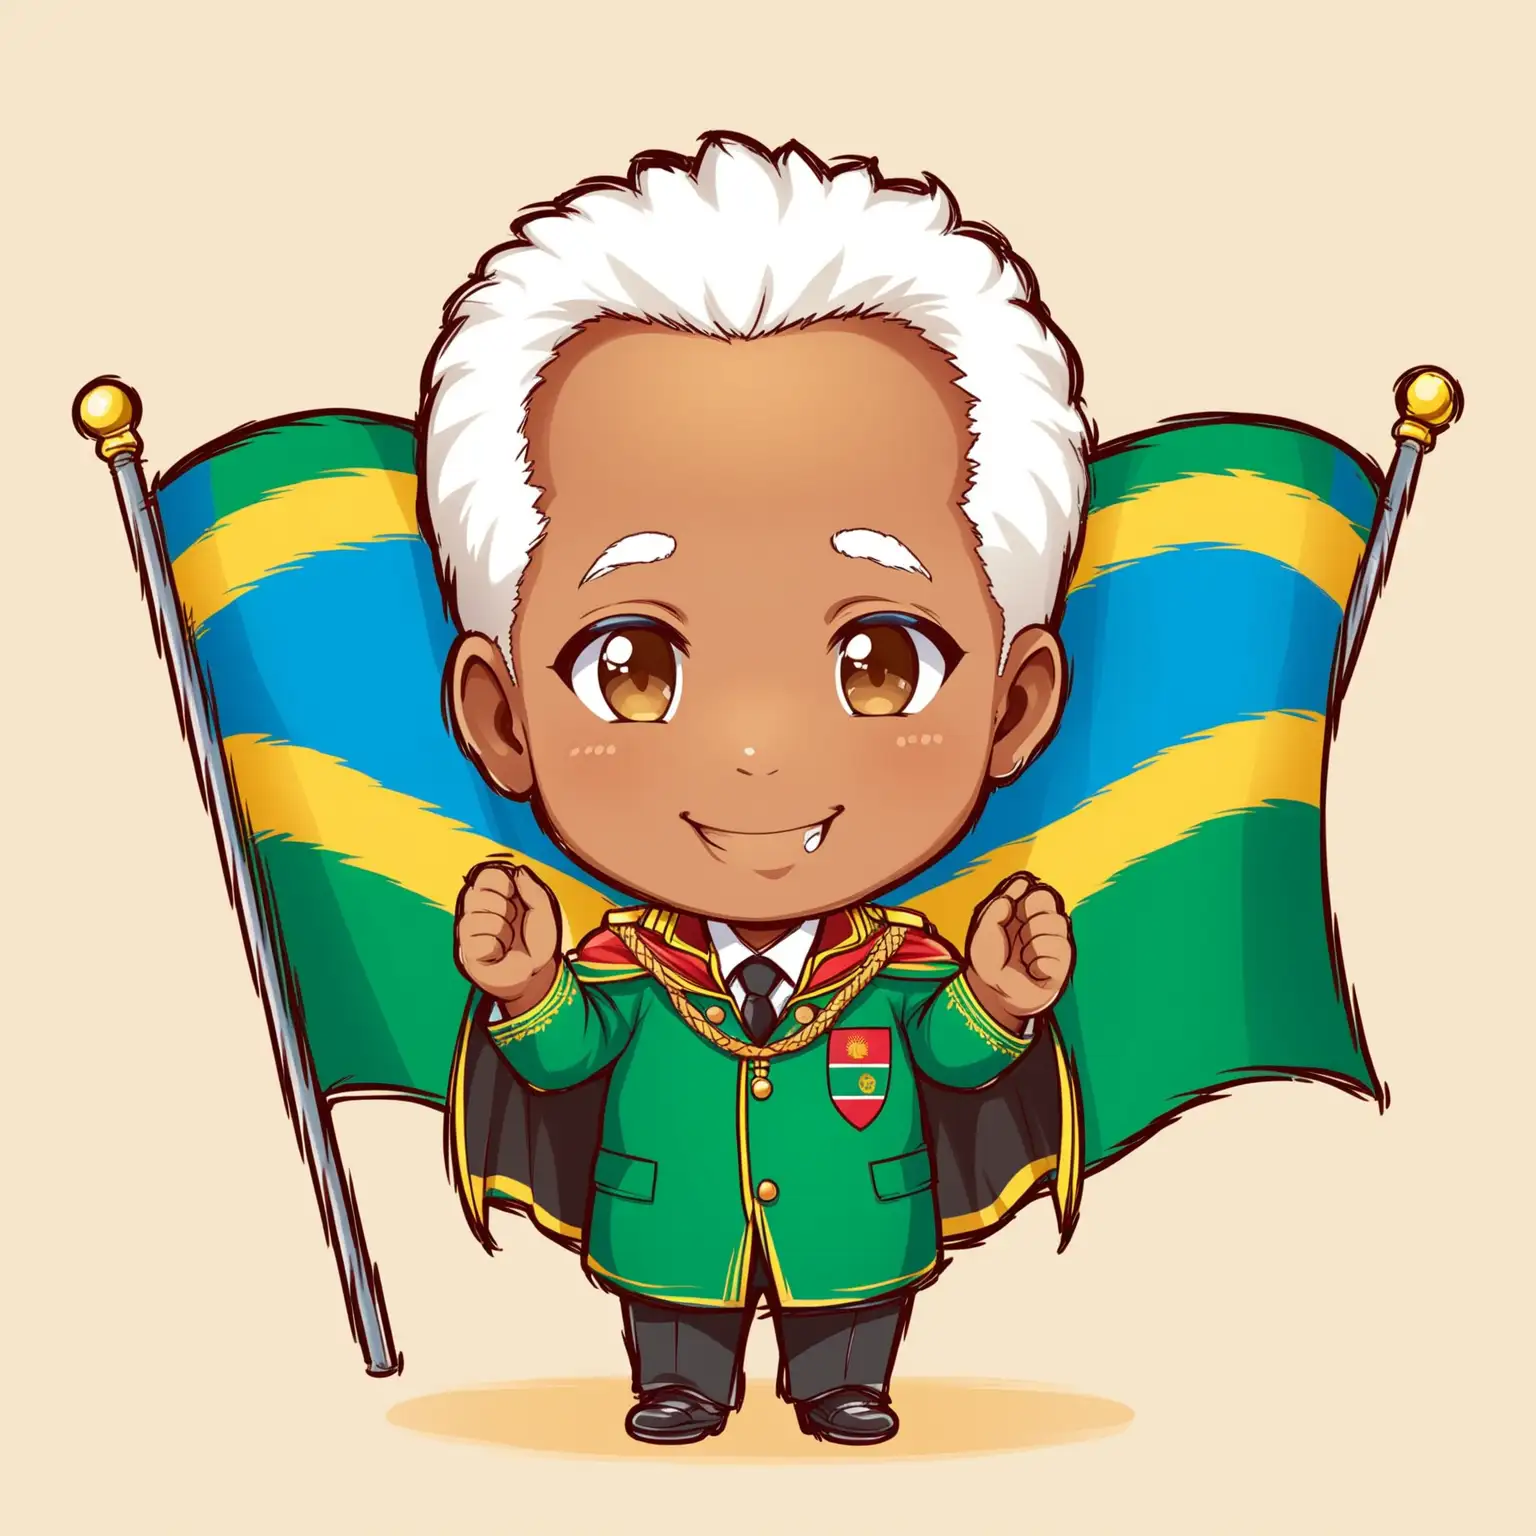 Create a professional illustratration Julius Nyerere in a chibis style, smiling, standing, with one of his hands up, wearing a tanzania flag cape. White background
Cartoon style.